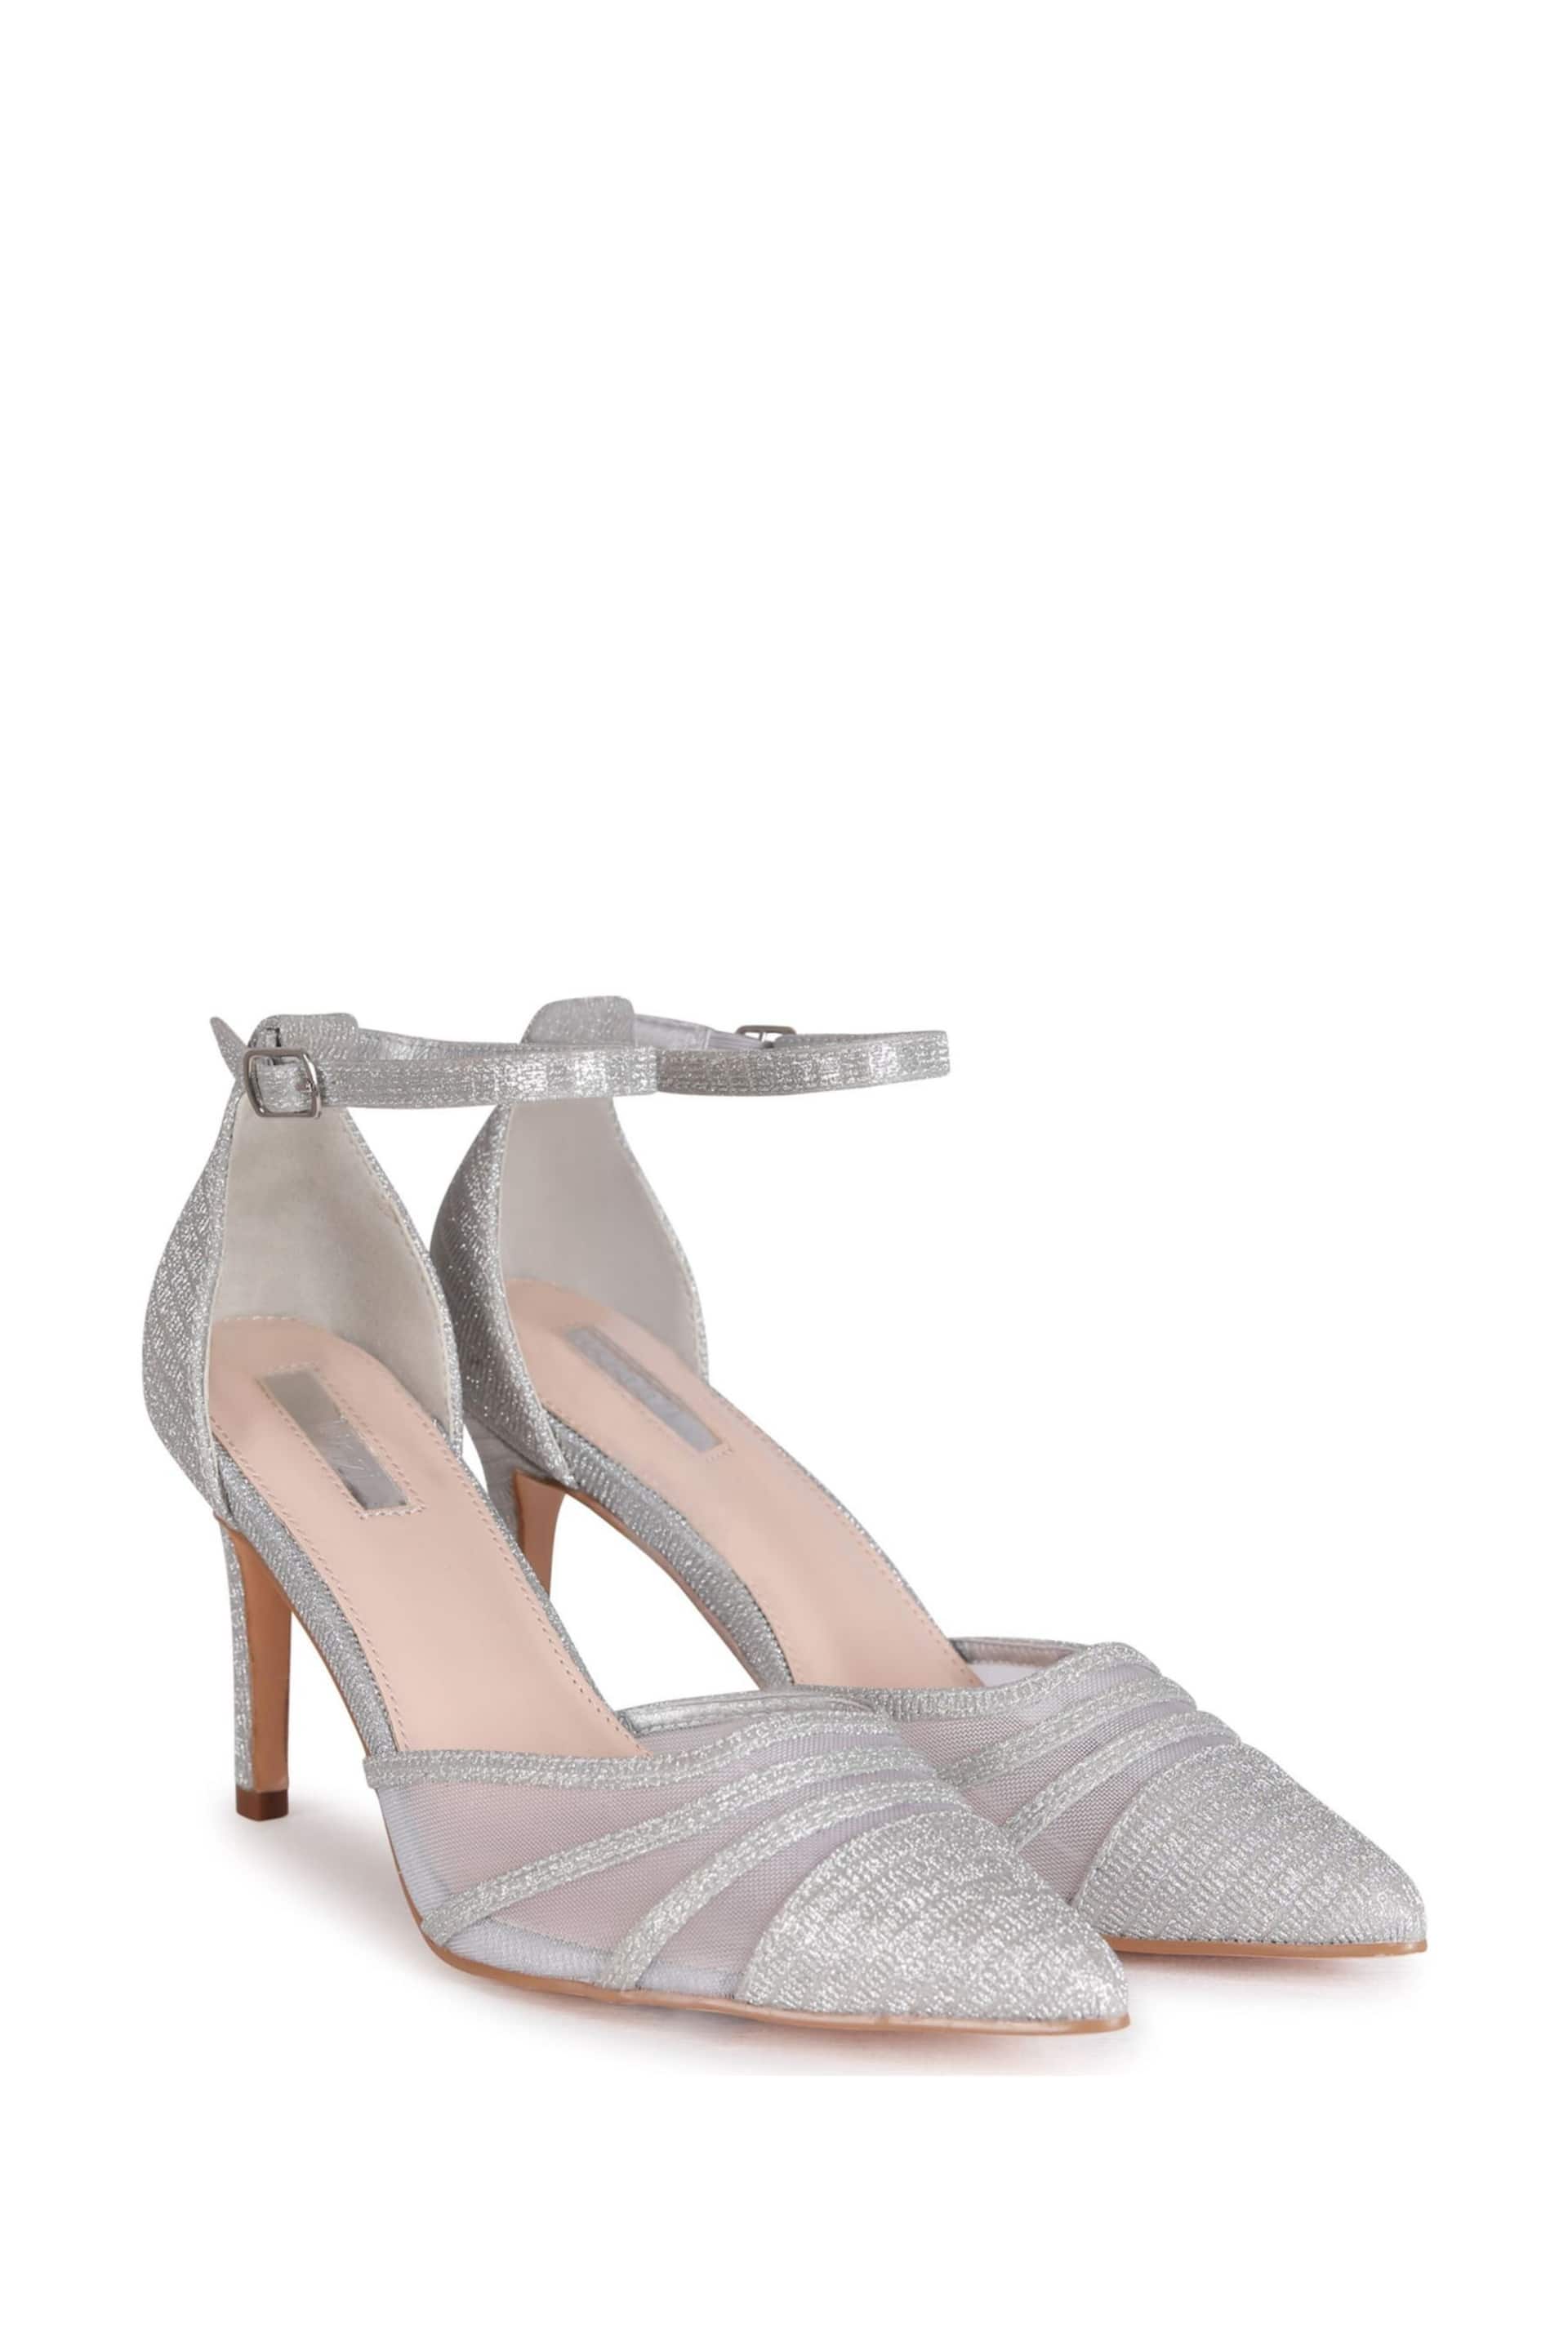 Linzi Silver Serri Court Stiletto Heels With Mesh Front Detail - Image 4 of 5